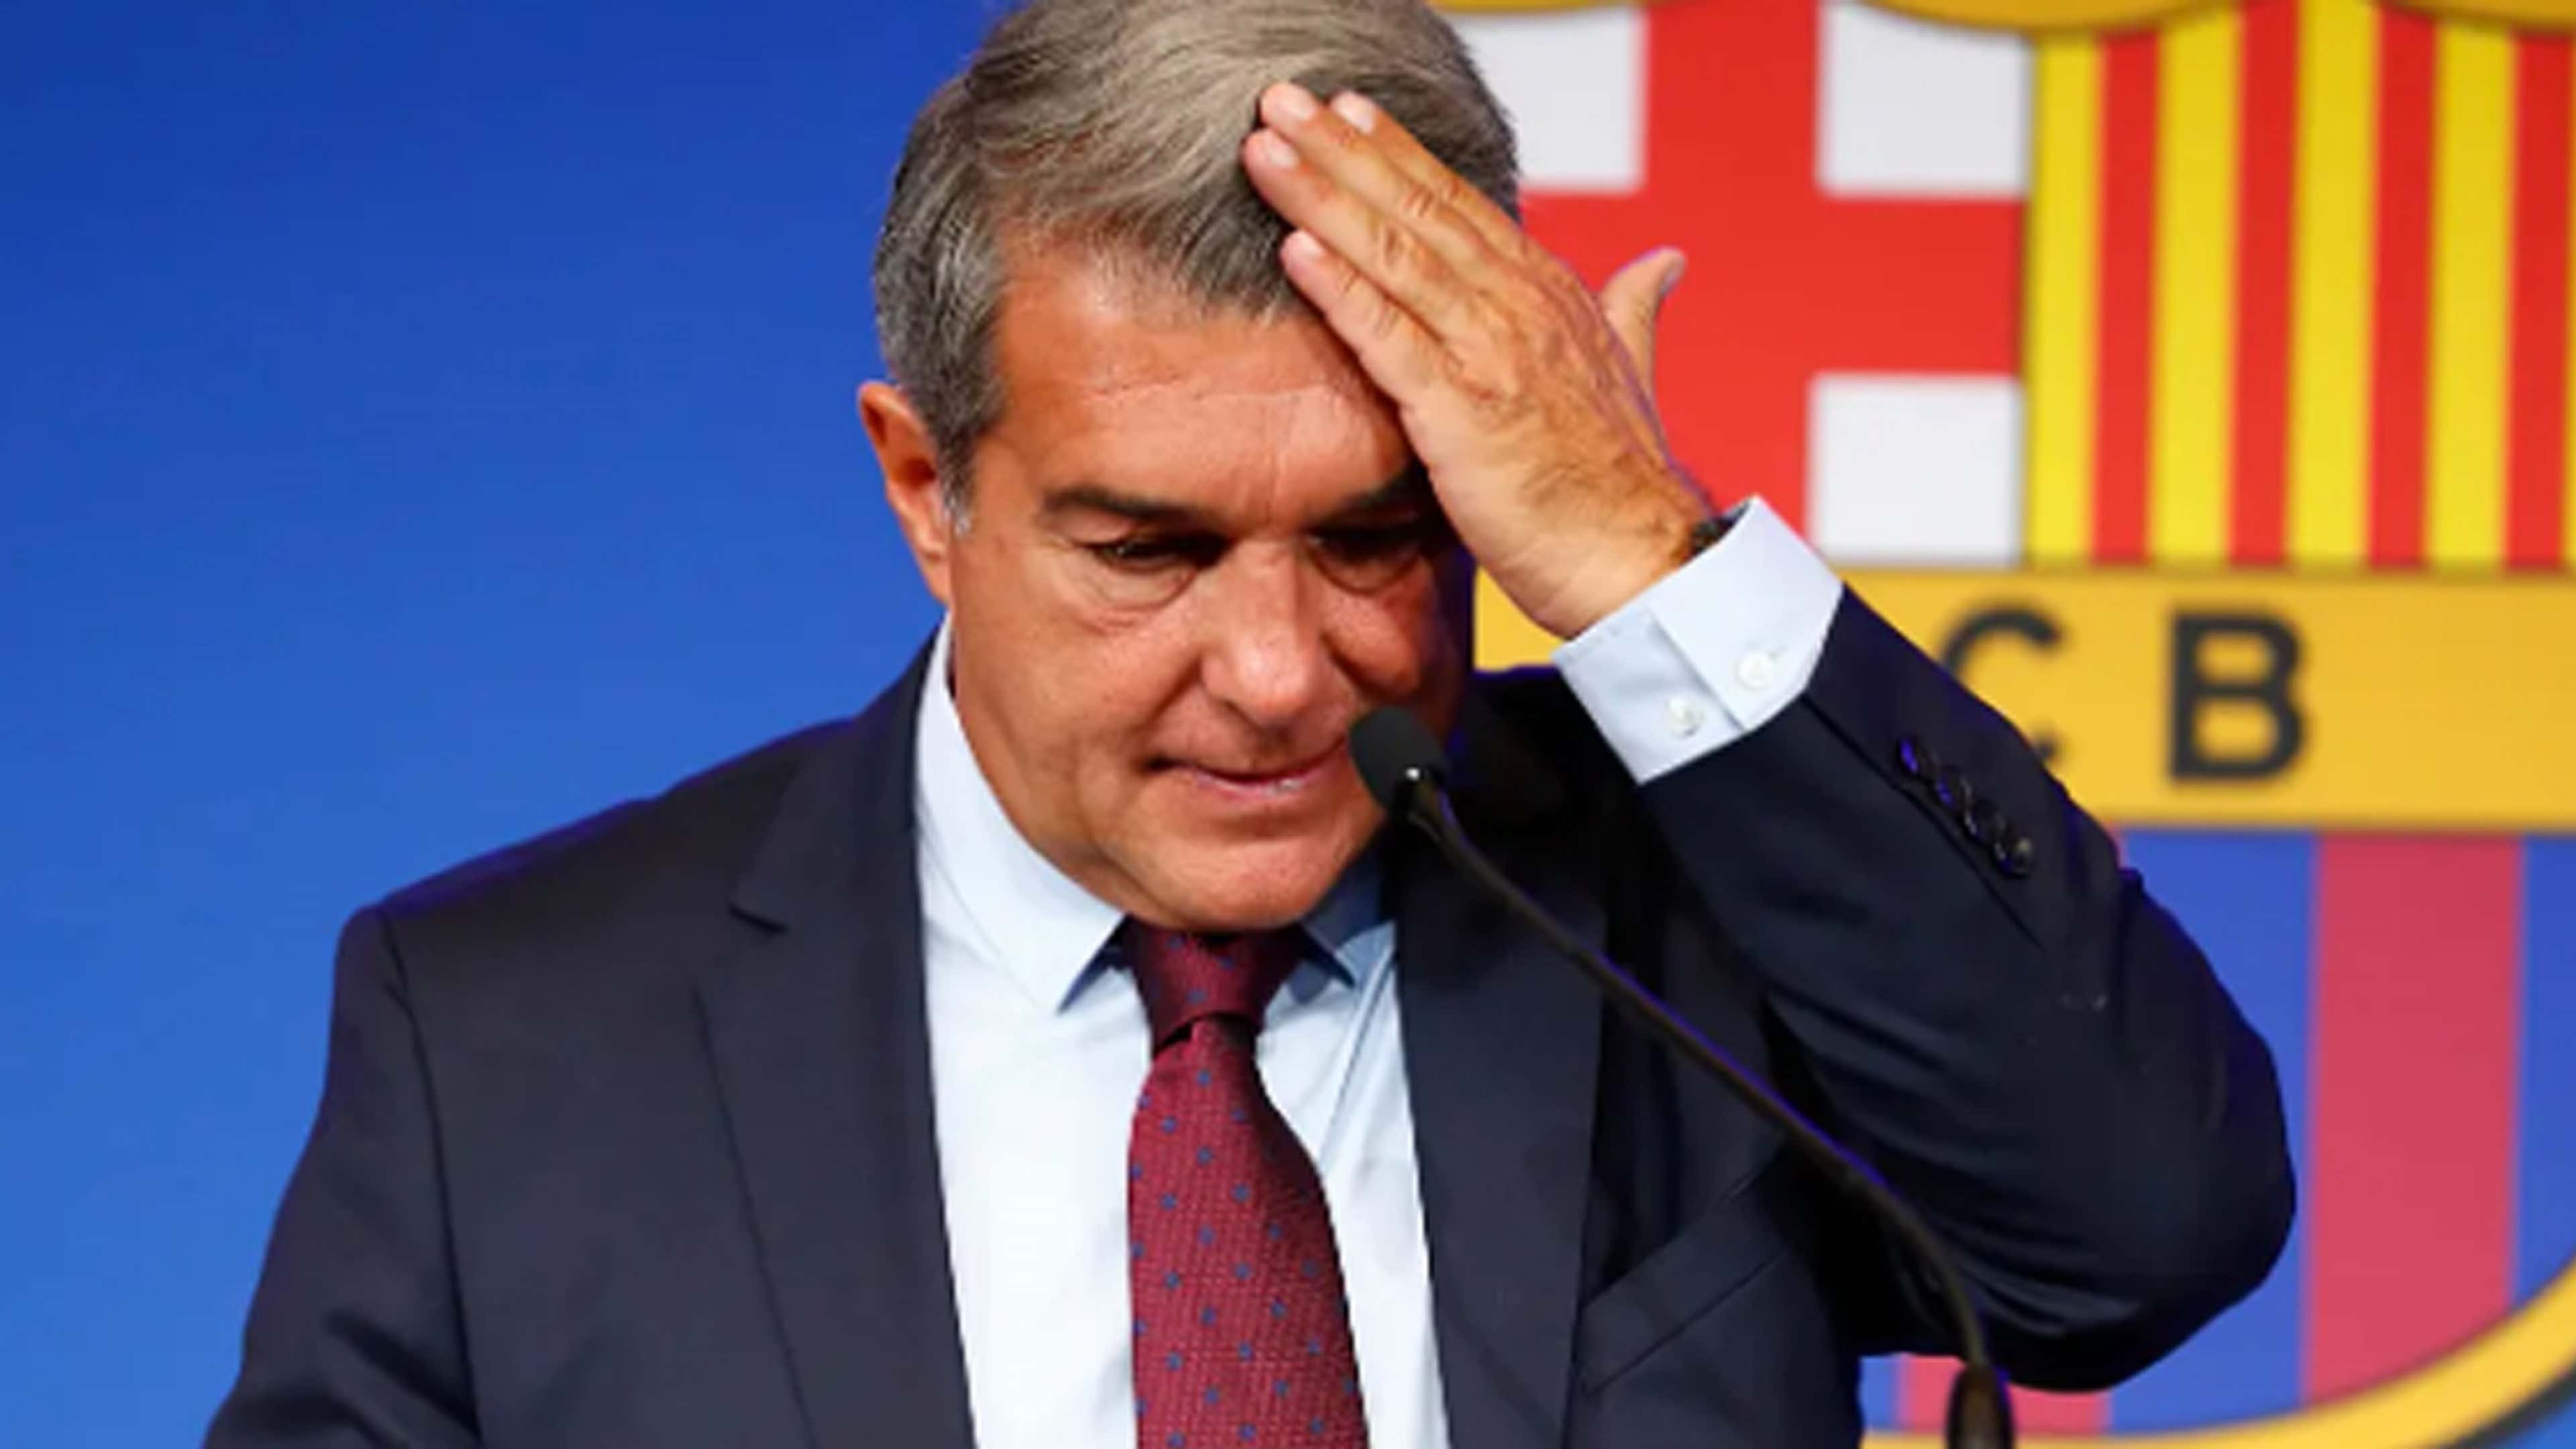 La Liga chief Javier Tebas calls on Joan Laporta to step down as Barcelona  president over referee payment scandal | Goal.com